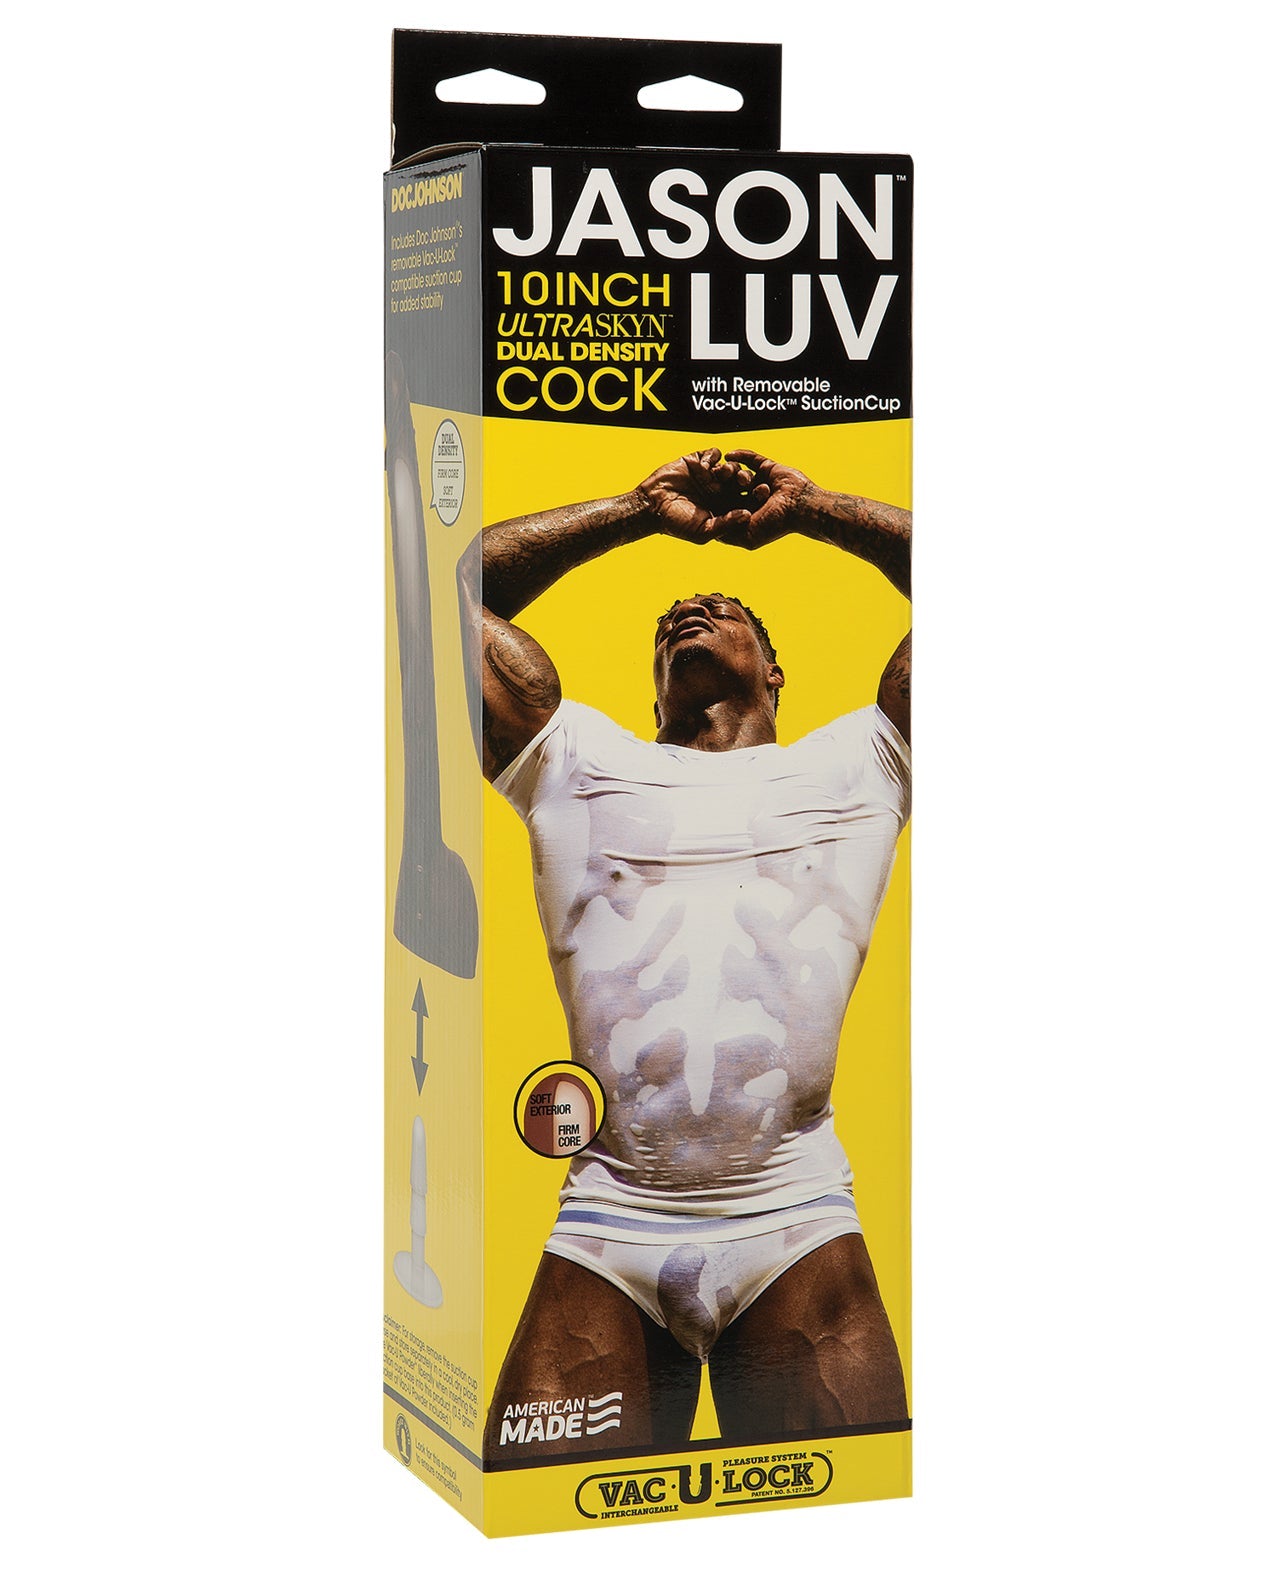 Signature Cocks Ultraskyn 10&quot; Cock w/Removable Vac-U-Lock Suction Cup - Jason Luv